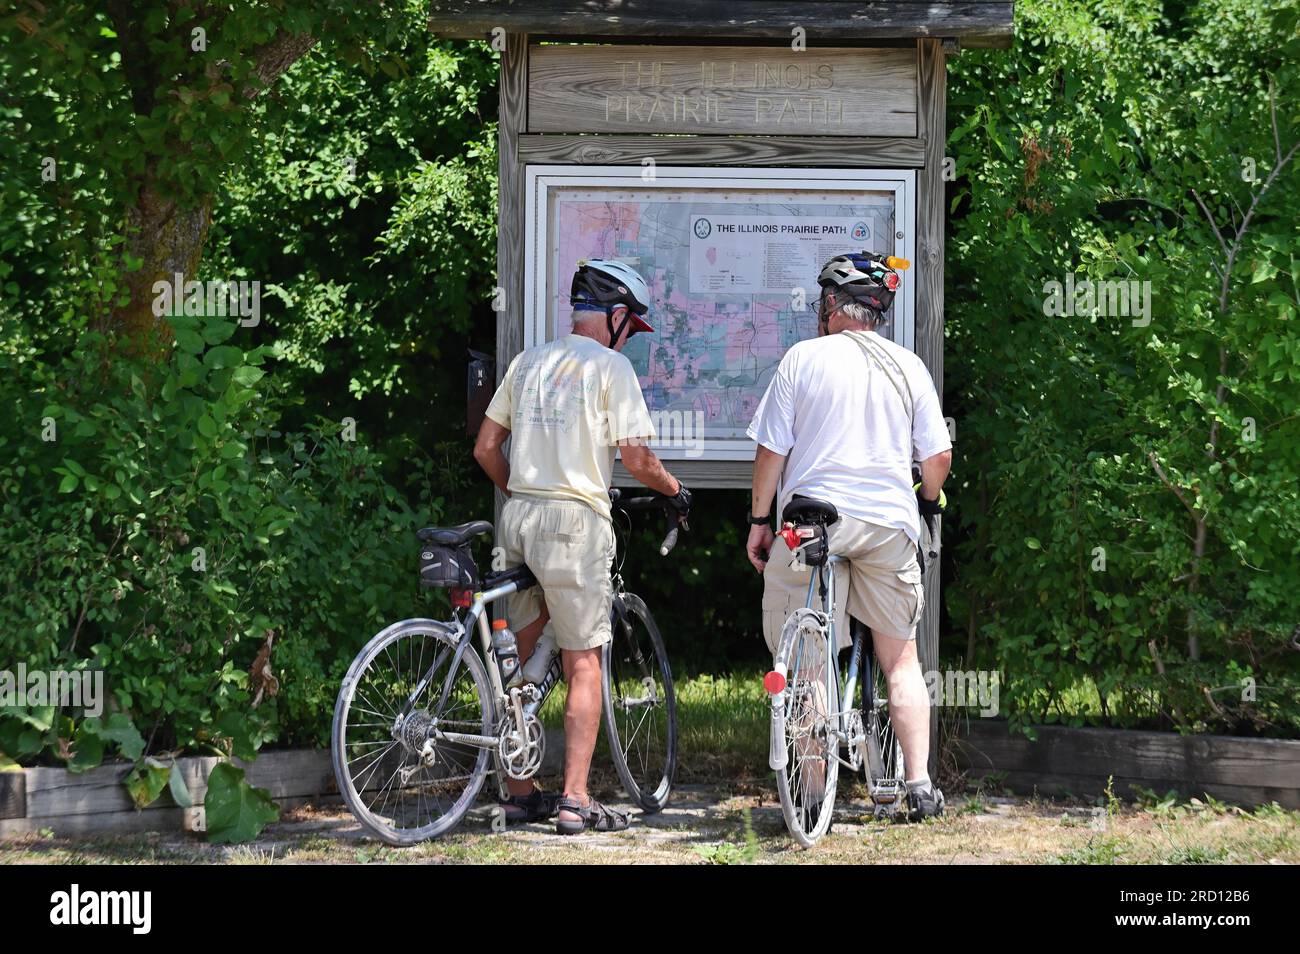 West Chicago, Illinois, USA. A pair of cyclists stop to check a map along the Illinois Prairie Path trail in west suburban Chicago. Stock Photo